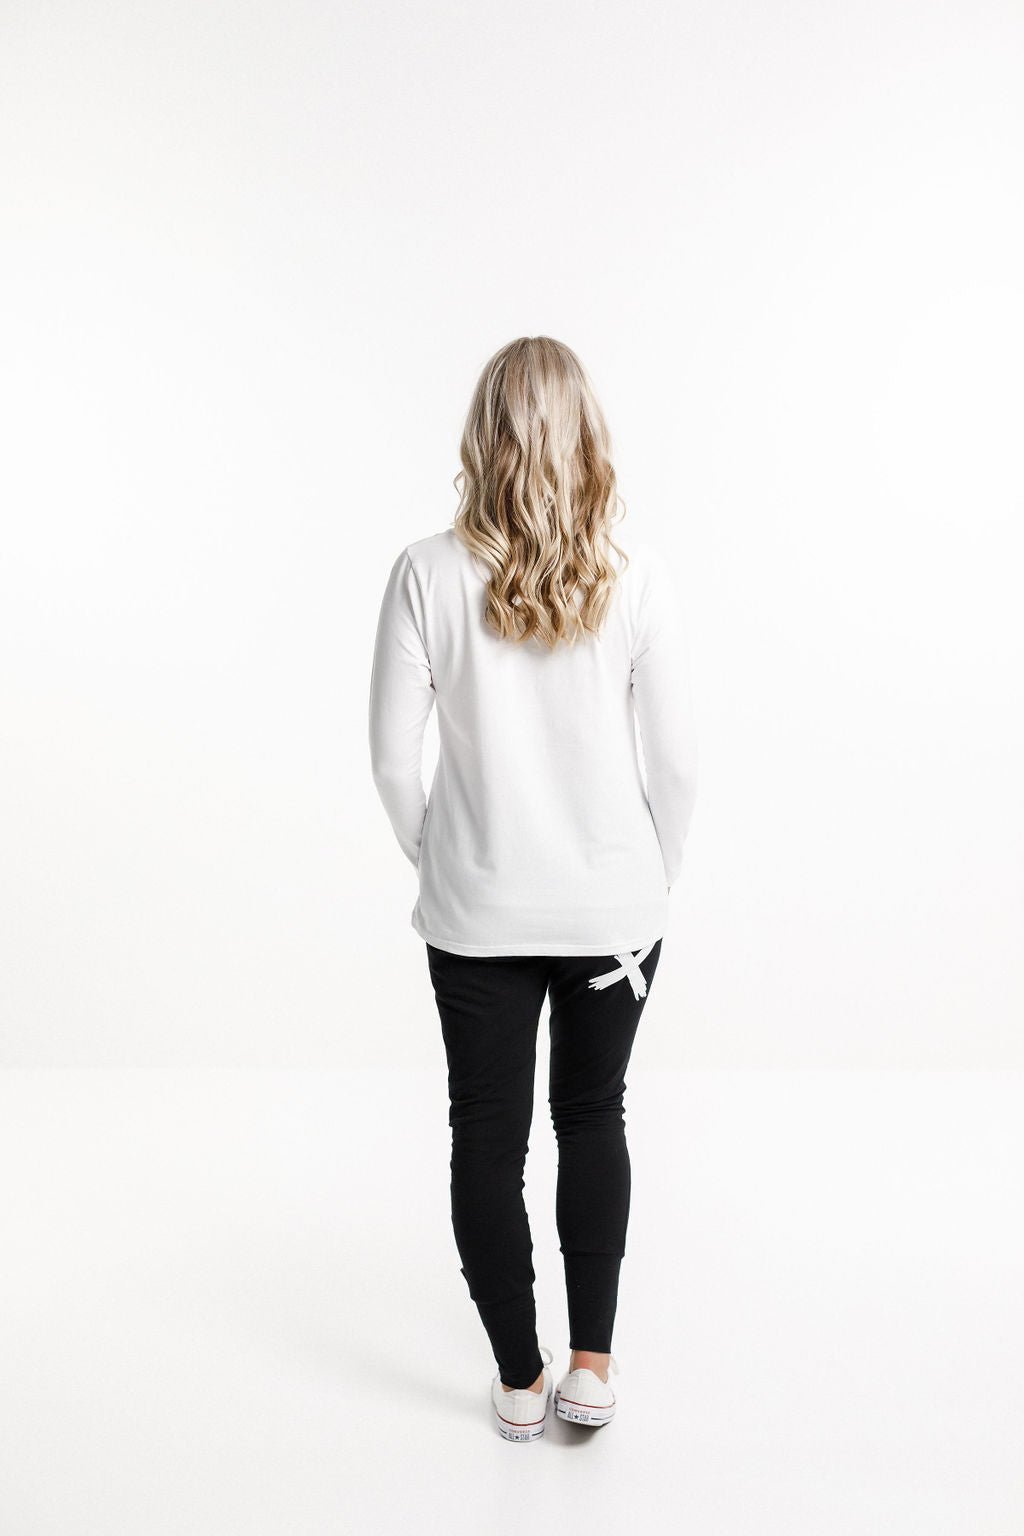 HOME LEE_TAYLOR TEE LONG SLEEVE WHITE _ TAYLOR TEE LONG SLEEVE WHITE _ Ebony Boutique NZ